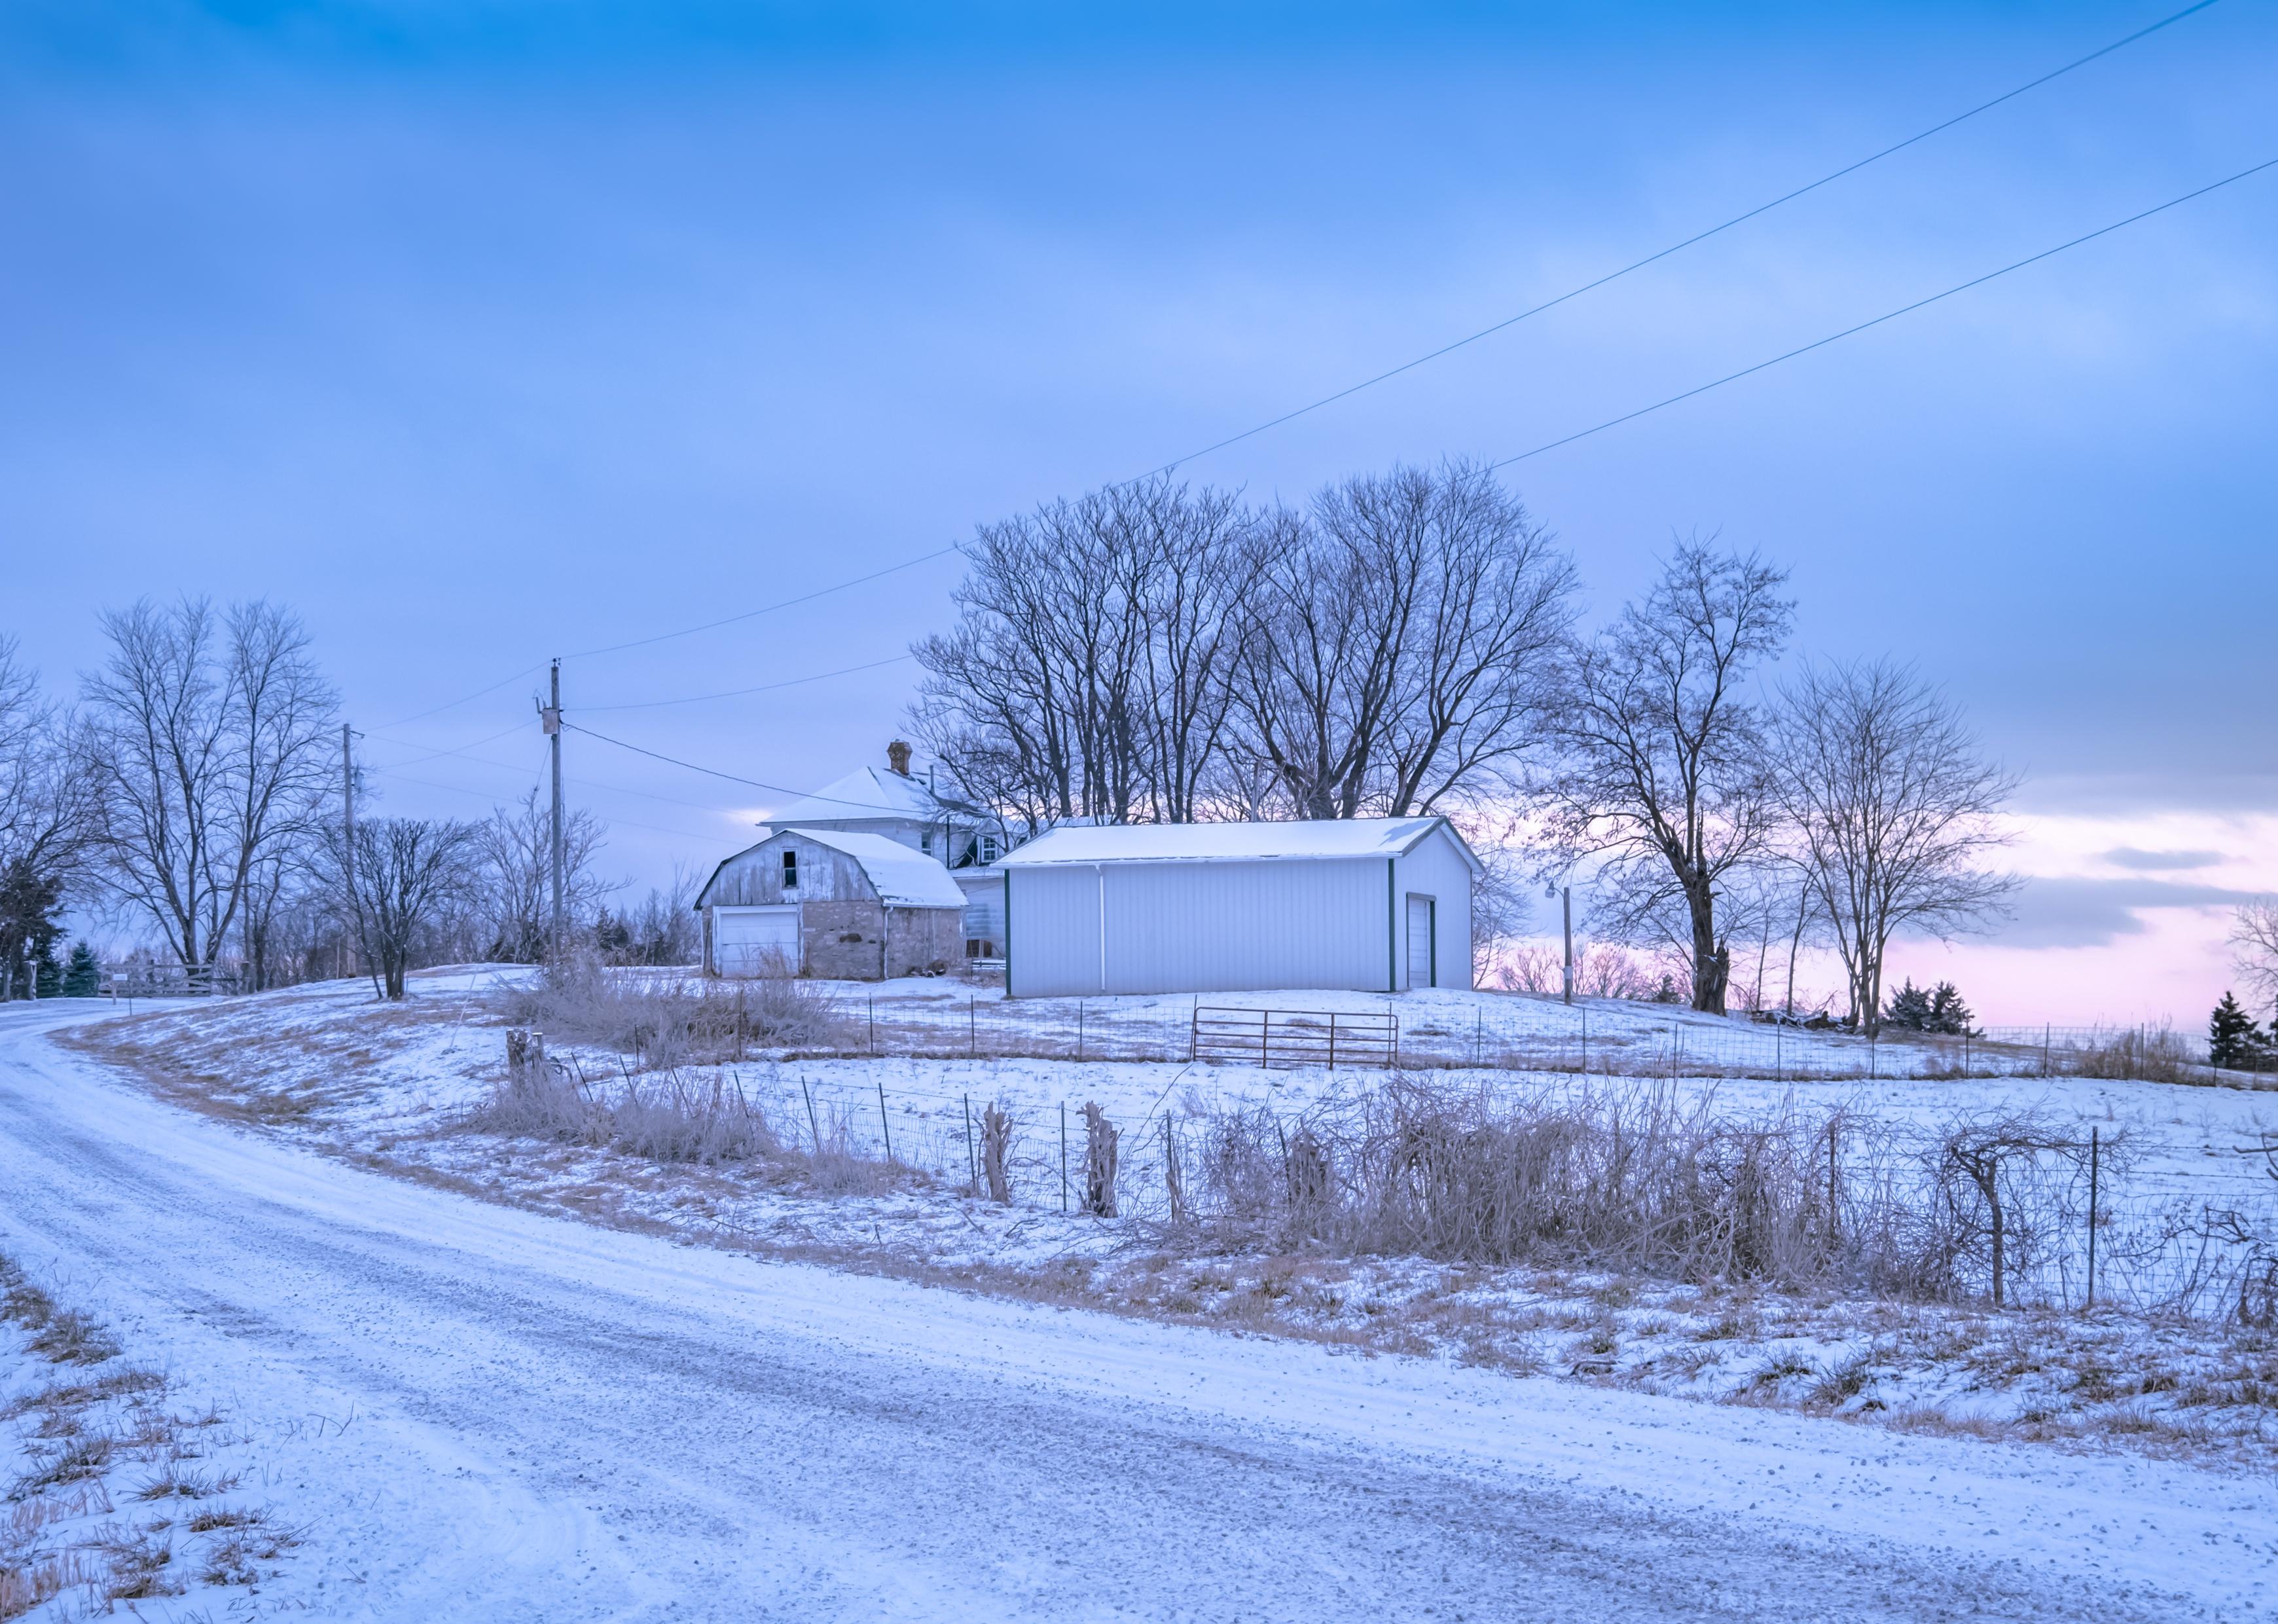 View of rural Midwestern road in winter with distant farm buildings.